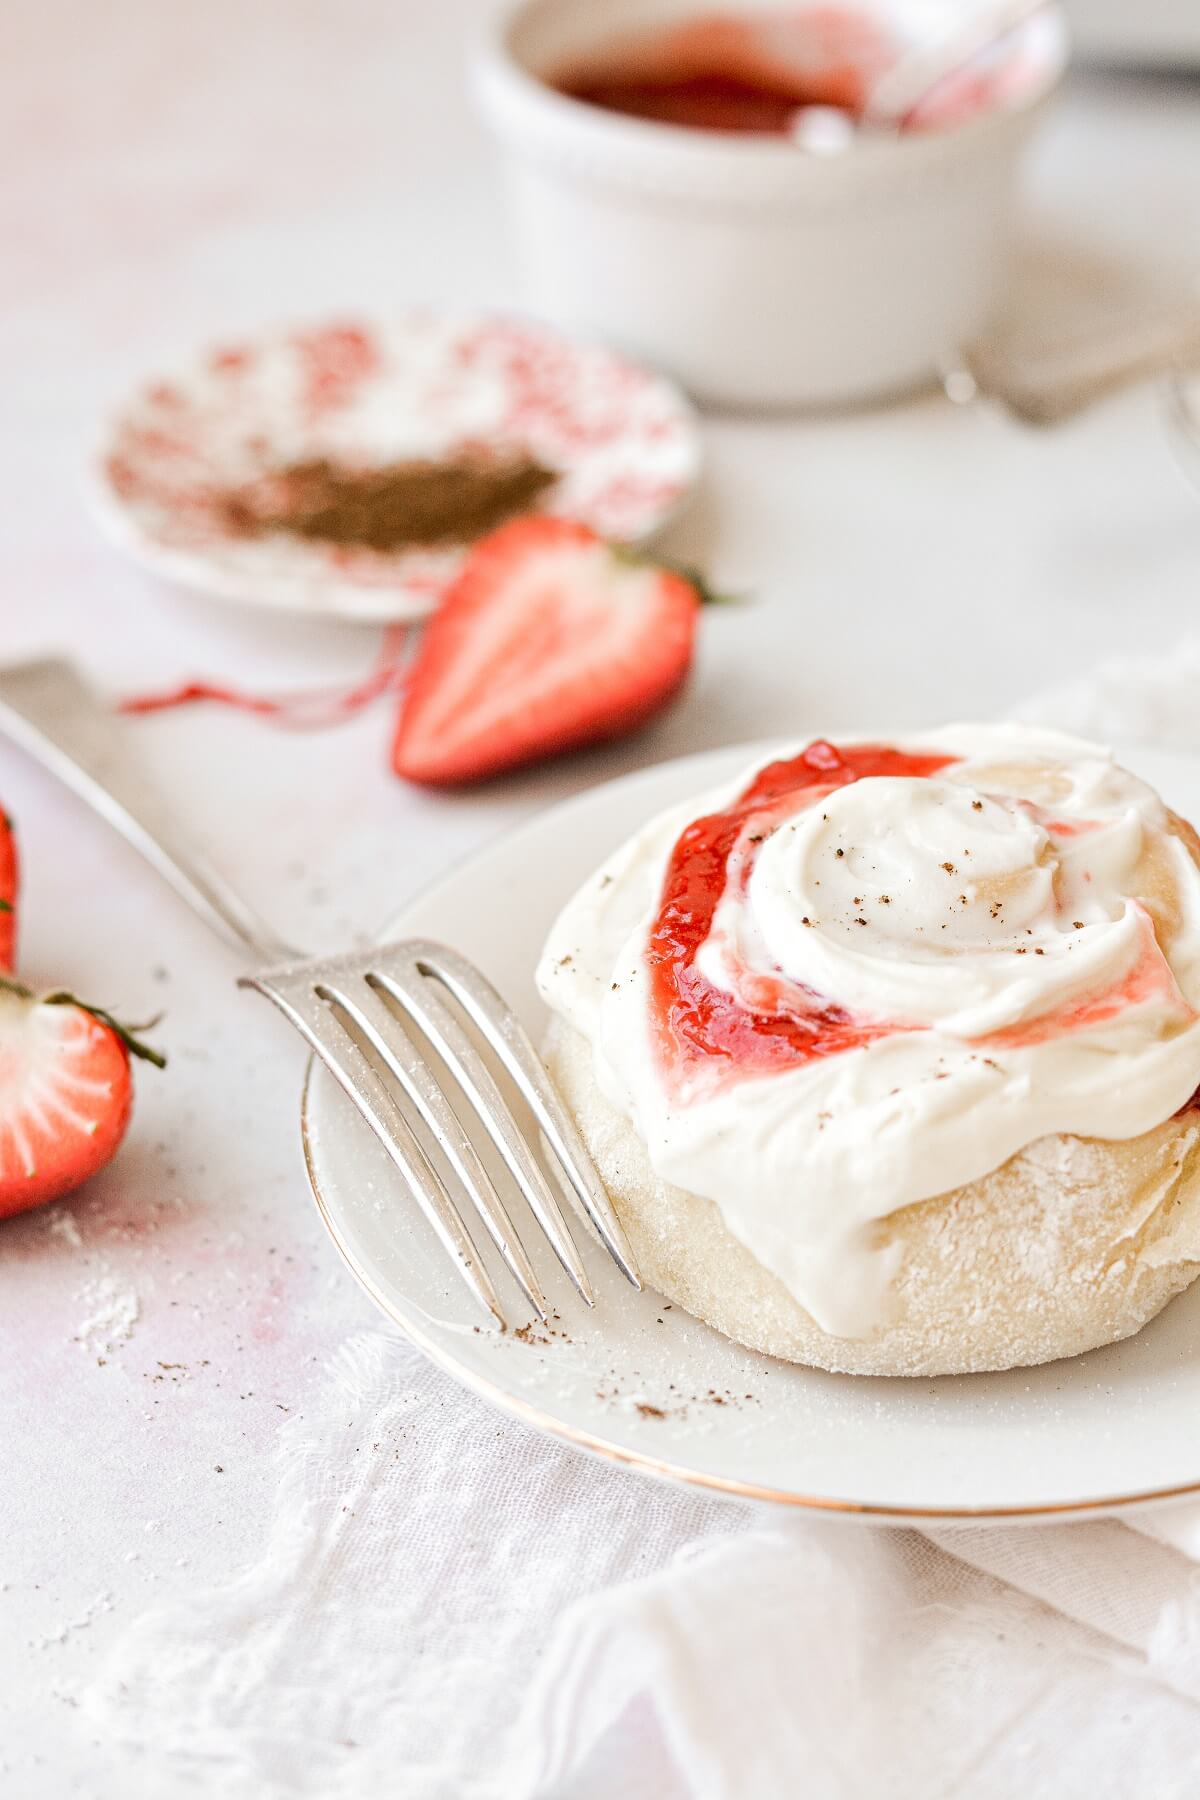 A strawberry roll with cream cheese frosting.